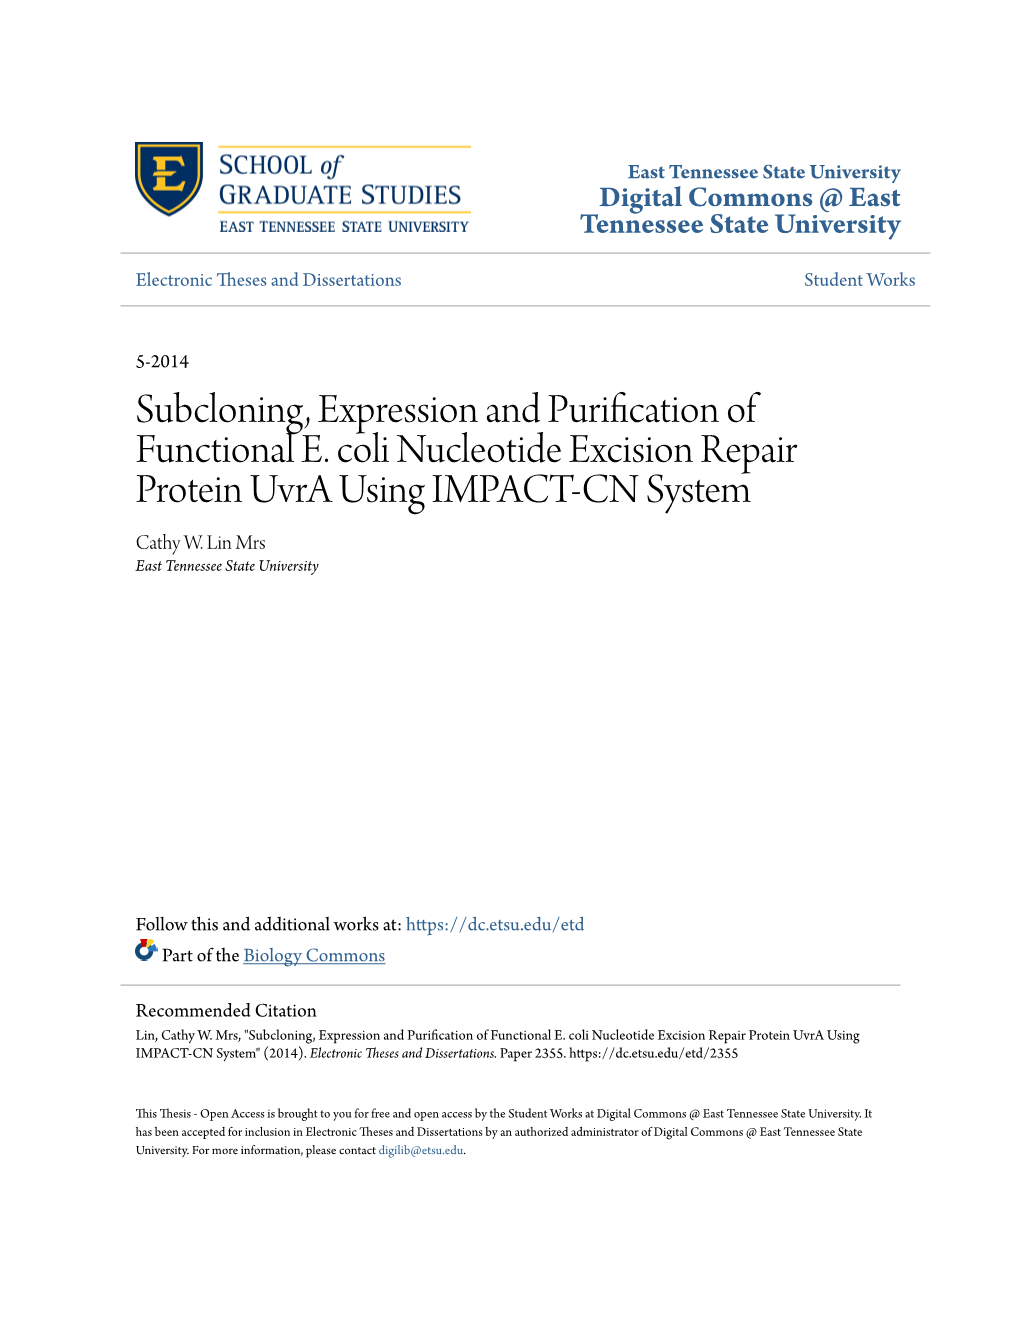 Subcloning, Expression and Purification of Functional E. Coli Nucleotide Excision Repair Protein Uvra Using IMPACT-CN System Cathy W